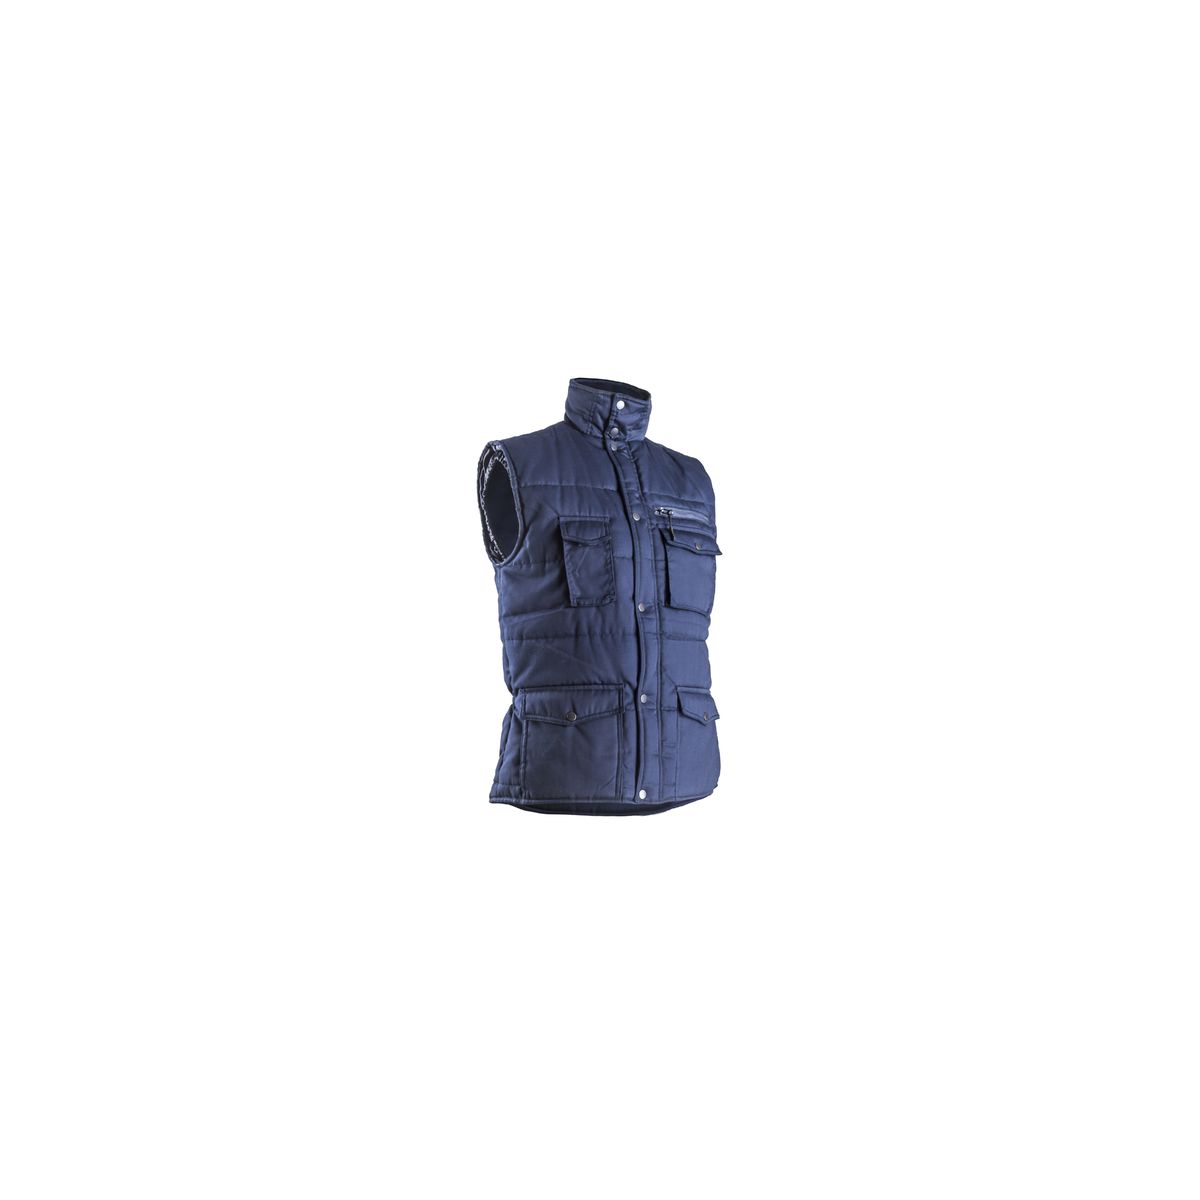 POLENA Gilet Froid marine, 65%PES/35%CO + Matelassage 190g/m² - COVERGUARD - Taille S 0